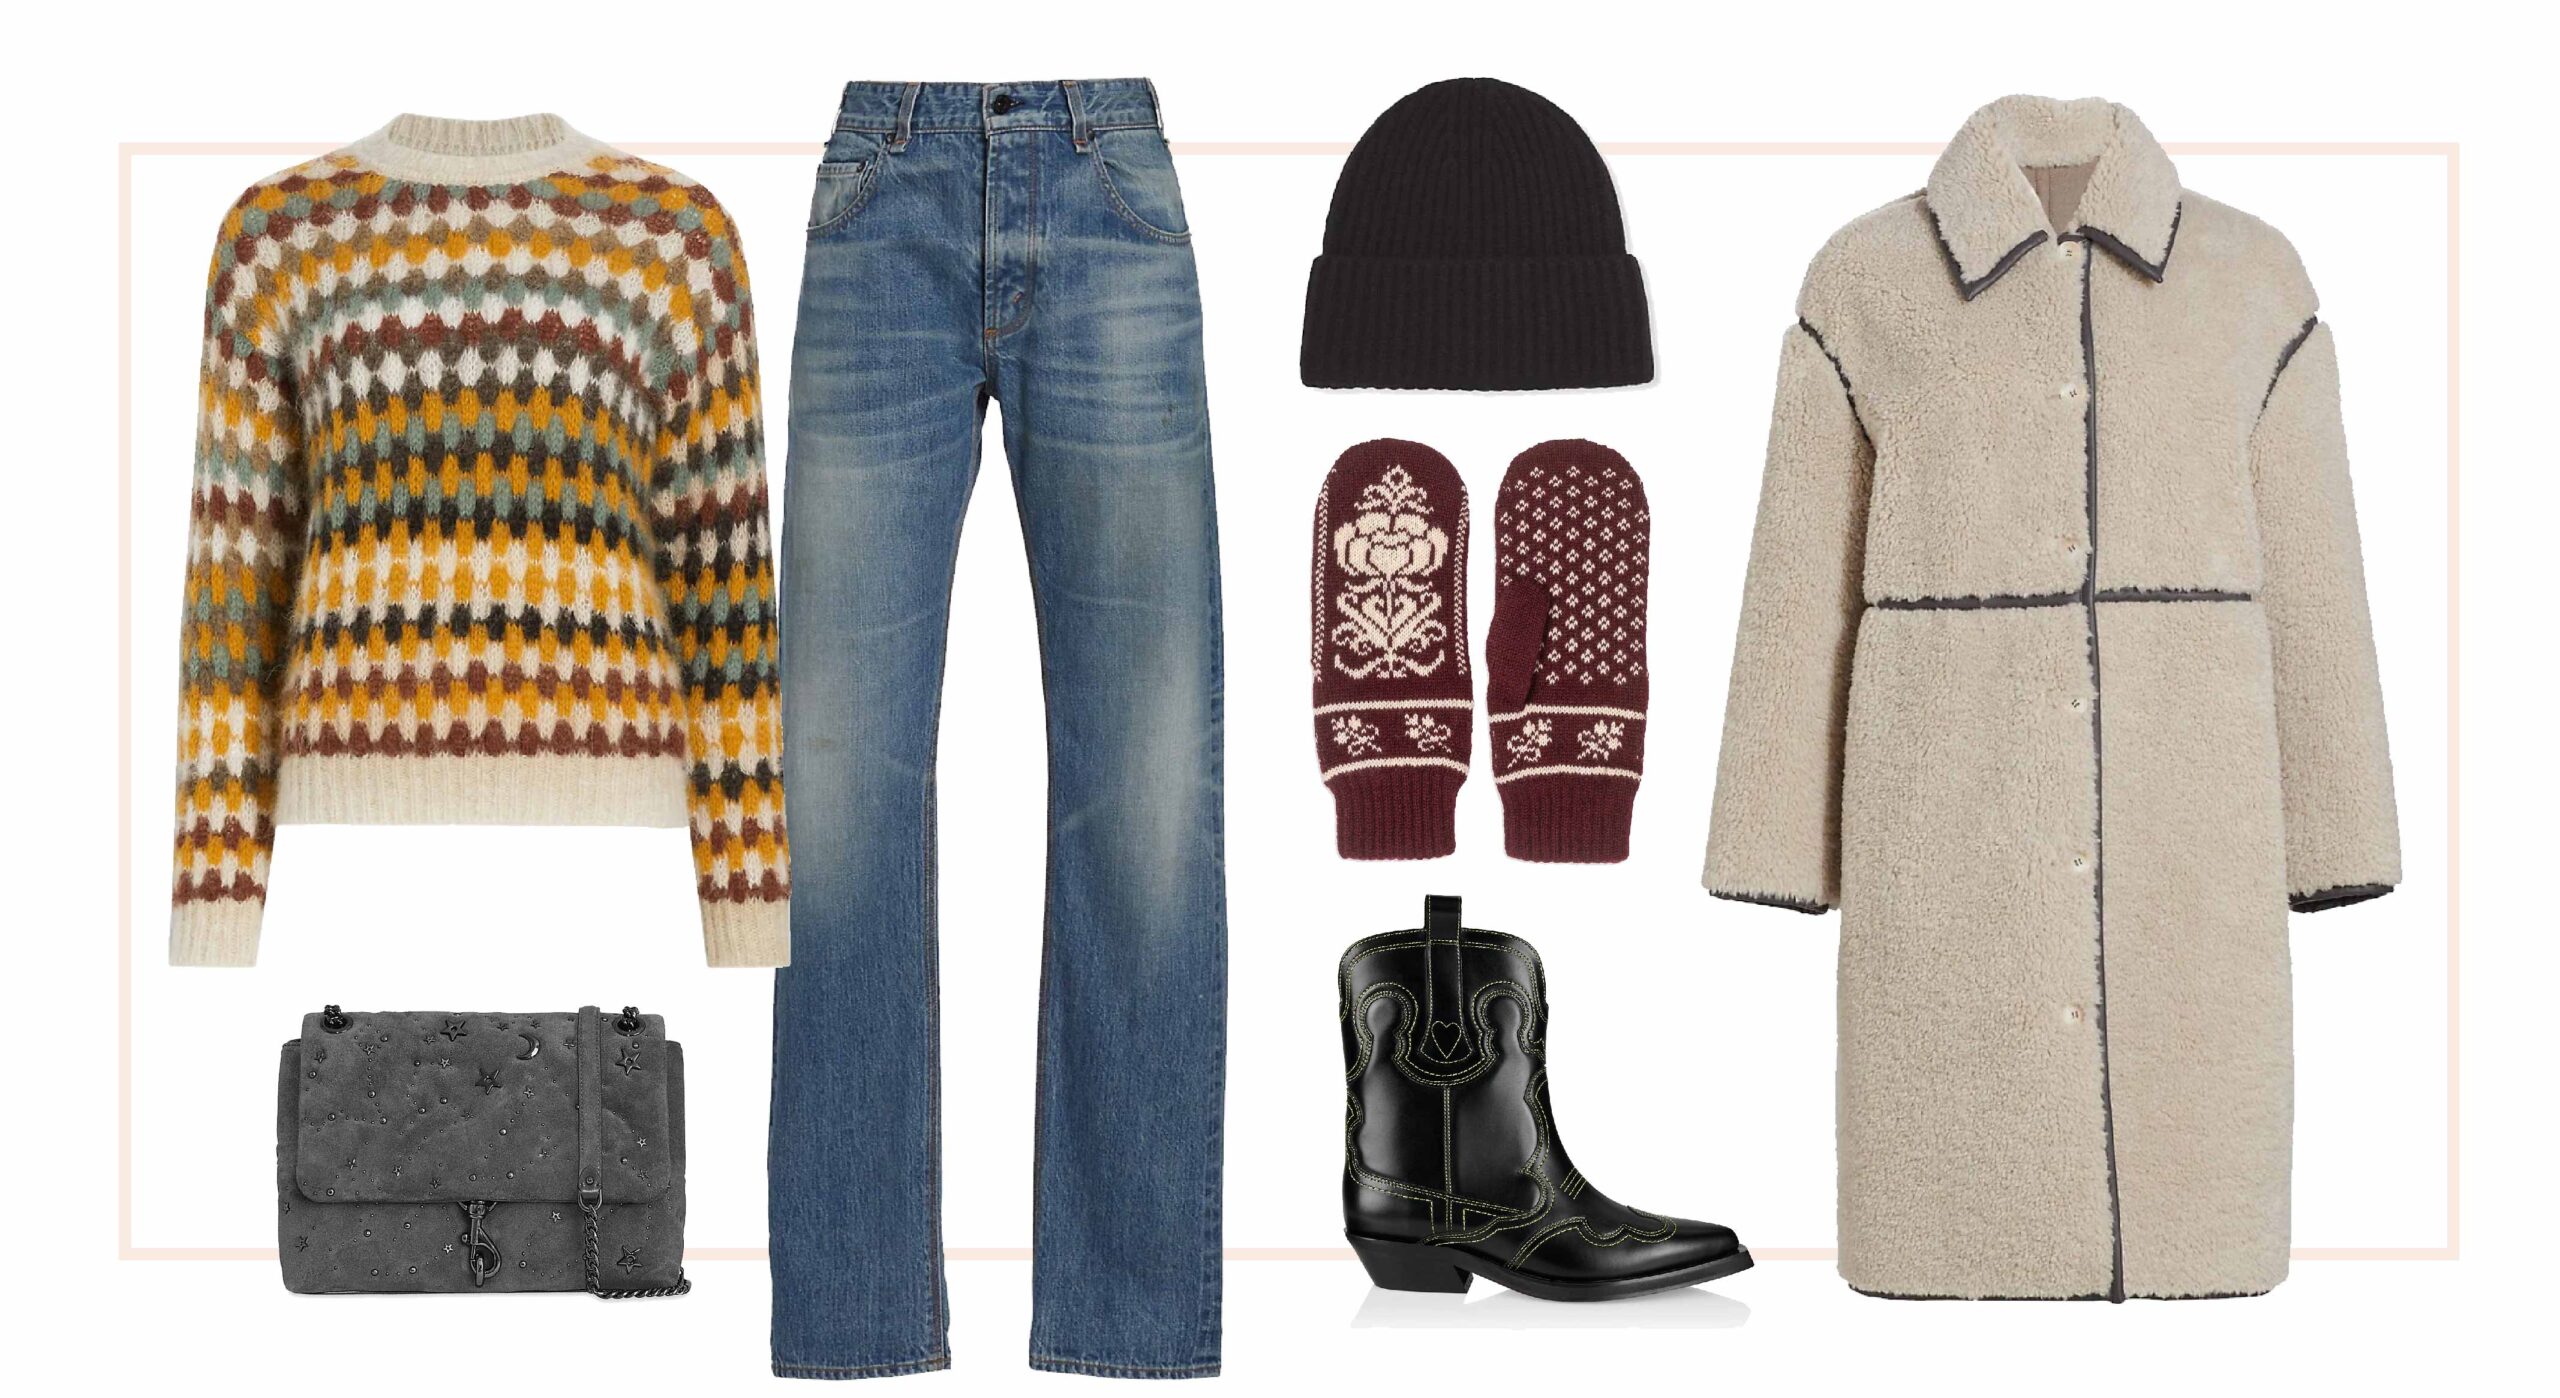 A Week’s Value Of Winter Outfits: Keep Heat, Look Cute